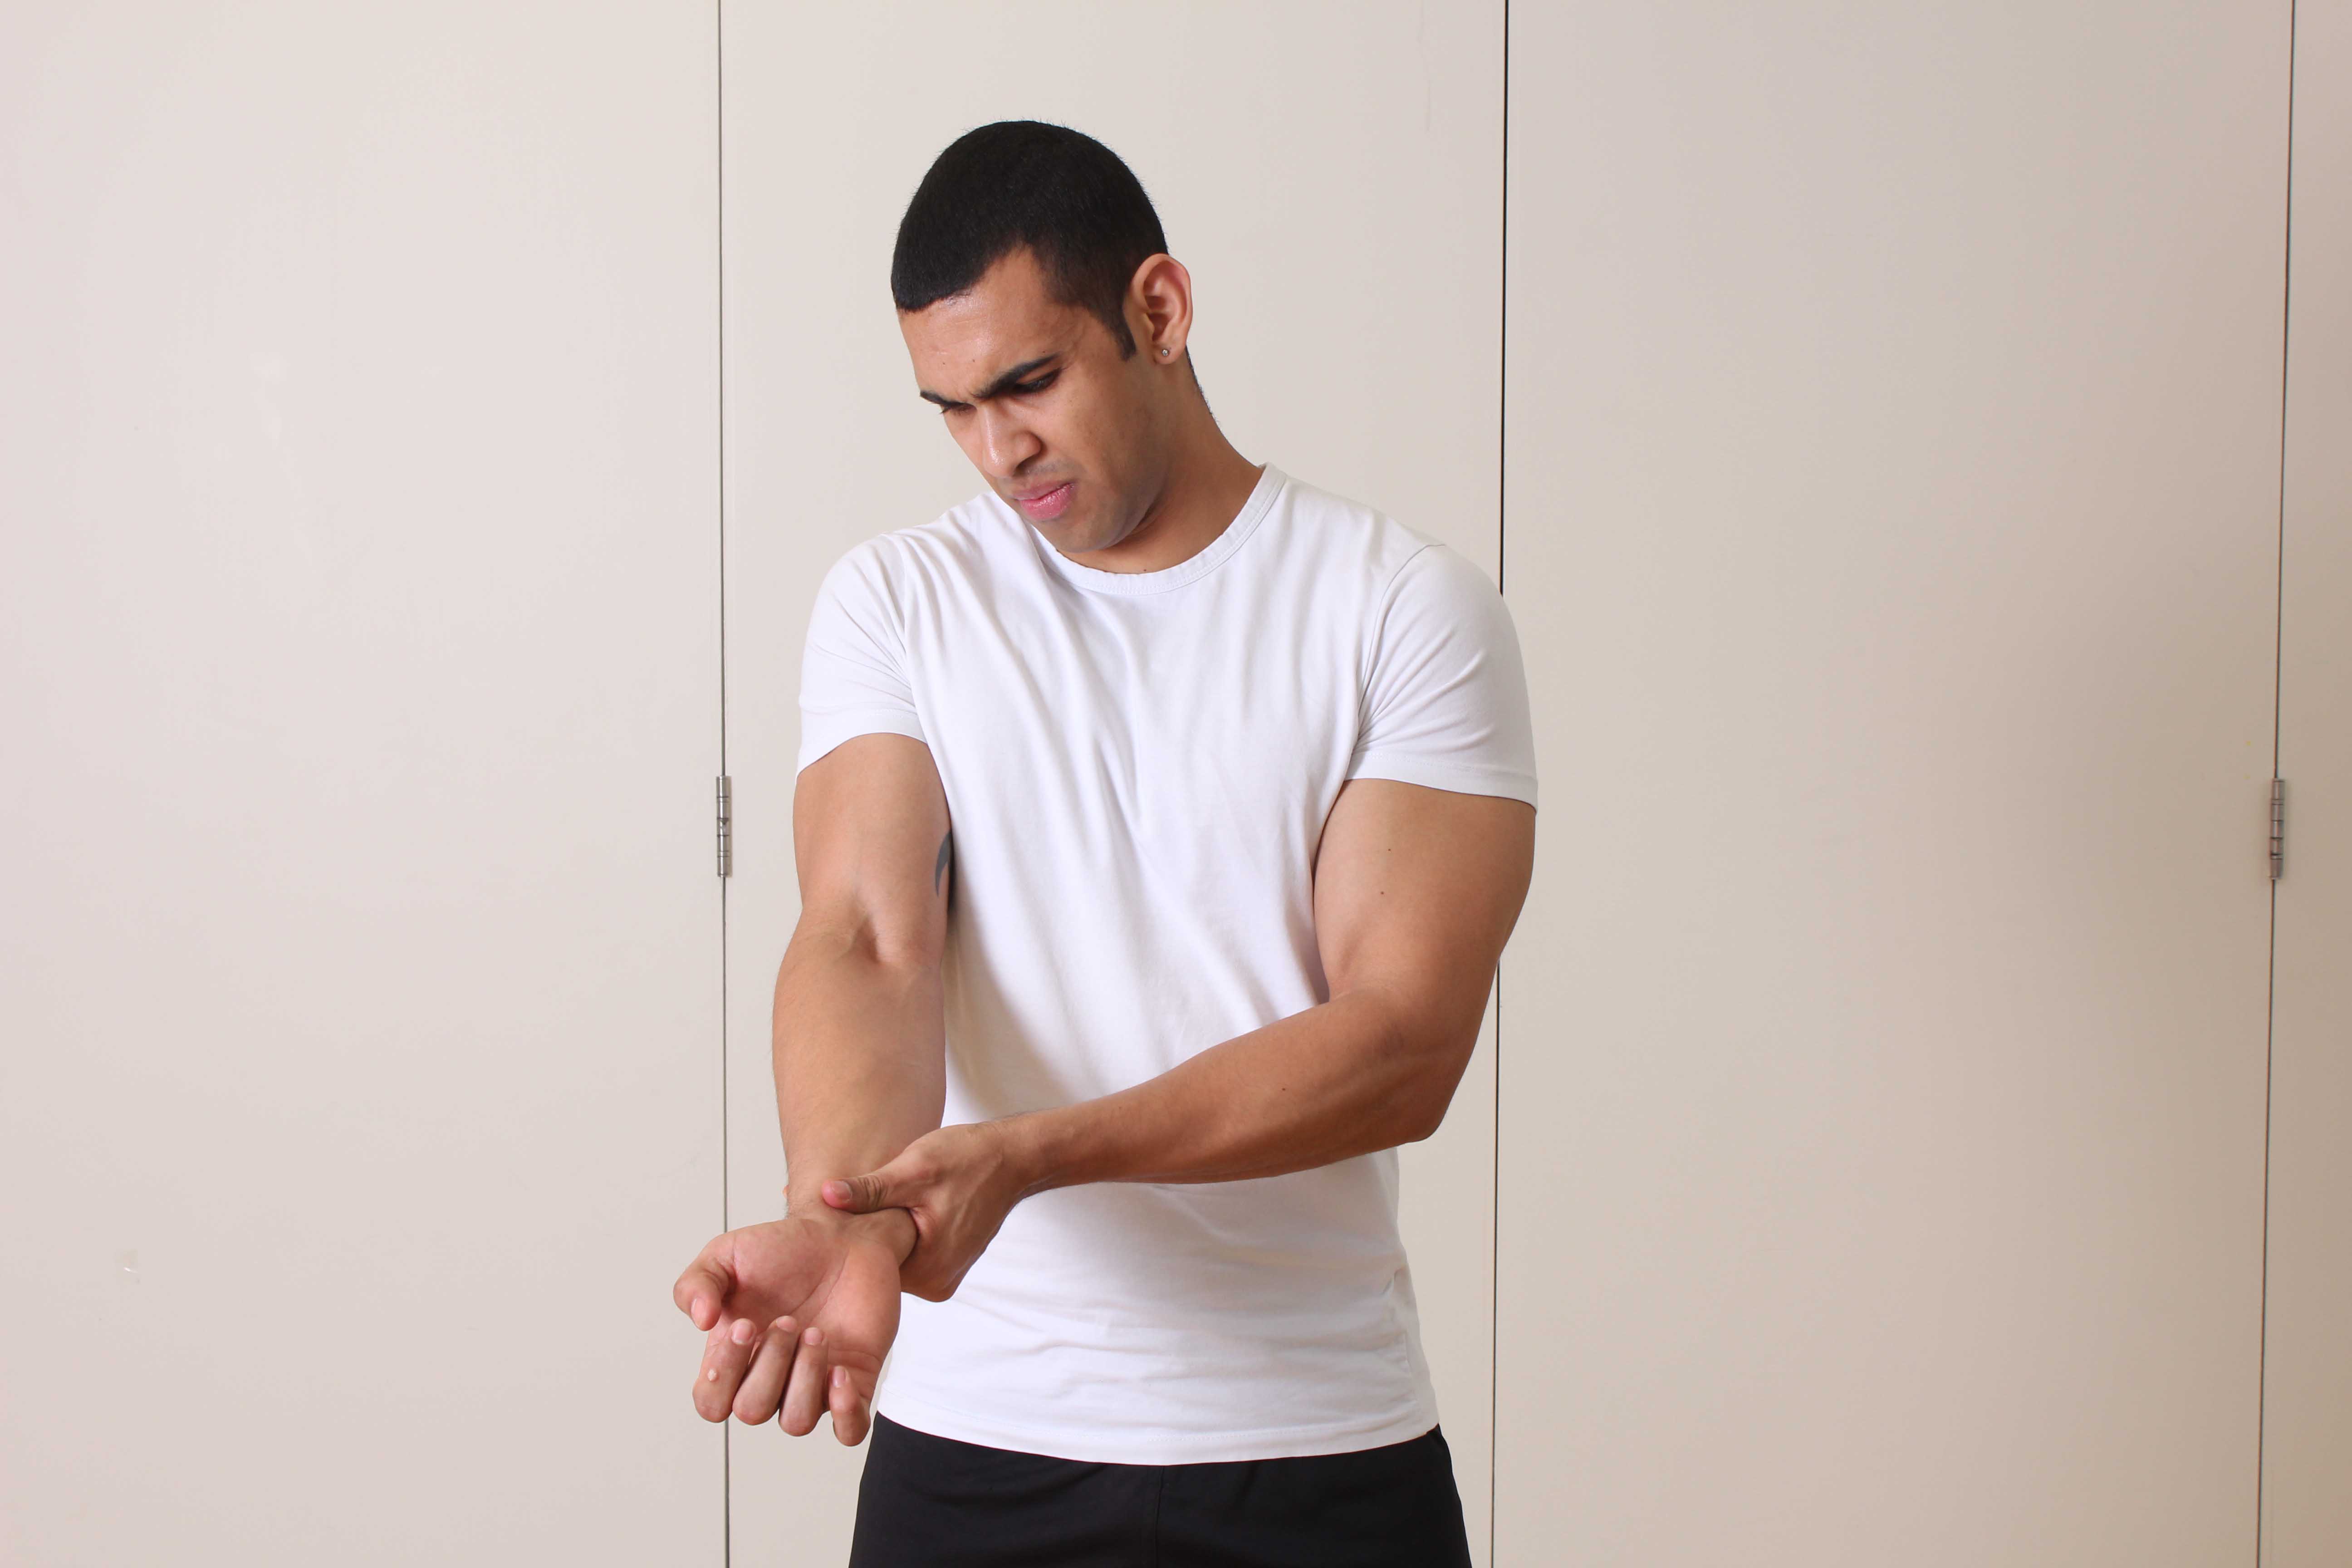 Wrist tendinopathy can be frustrating and unformfortable long term. Book in to see one of our friendly therapists for advice on how to treat it.